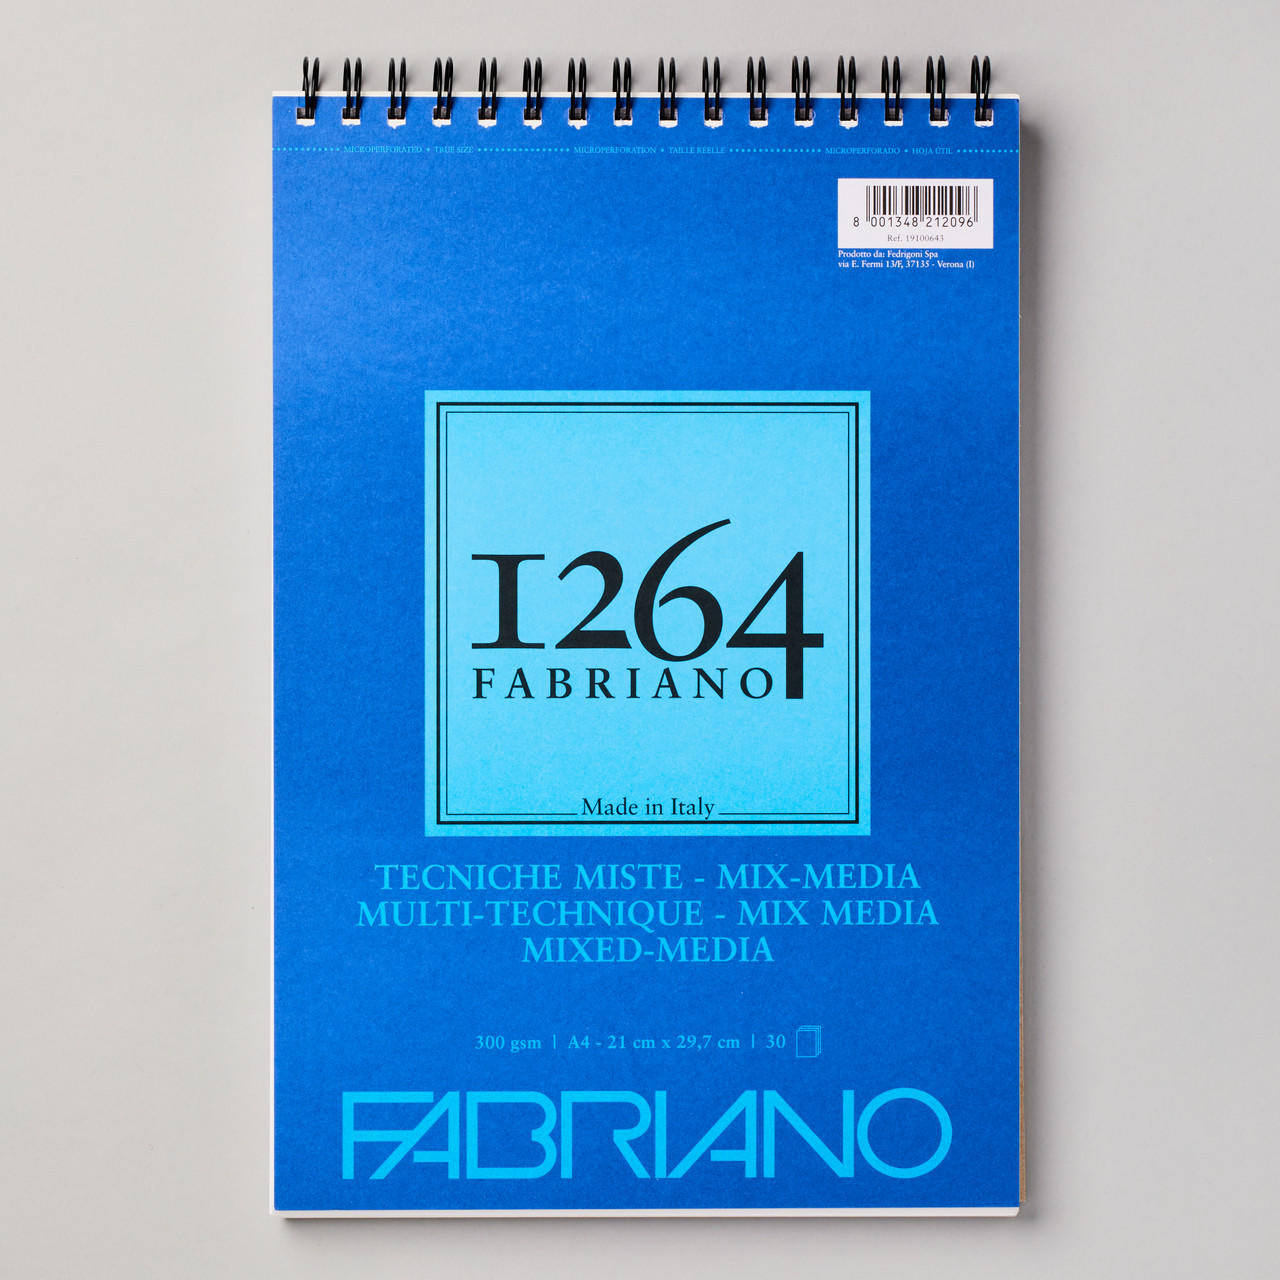 Fabriano 1264 Spiral Bound Mixed Media Pad 30 Sheets 180gsm A4